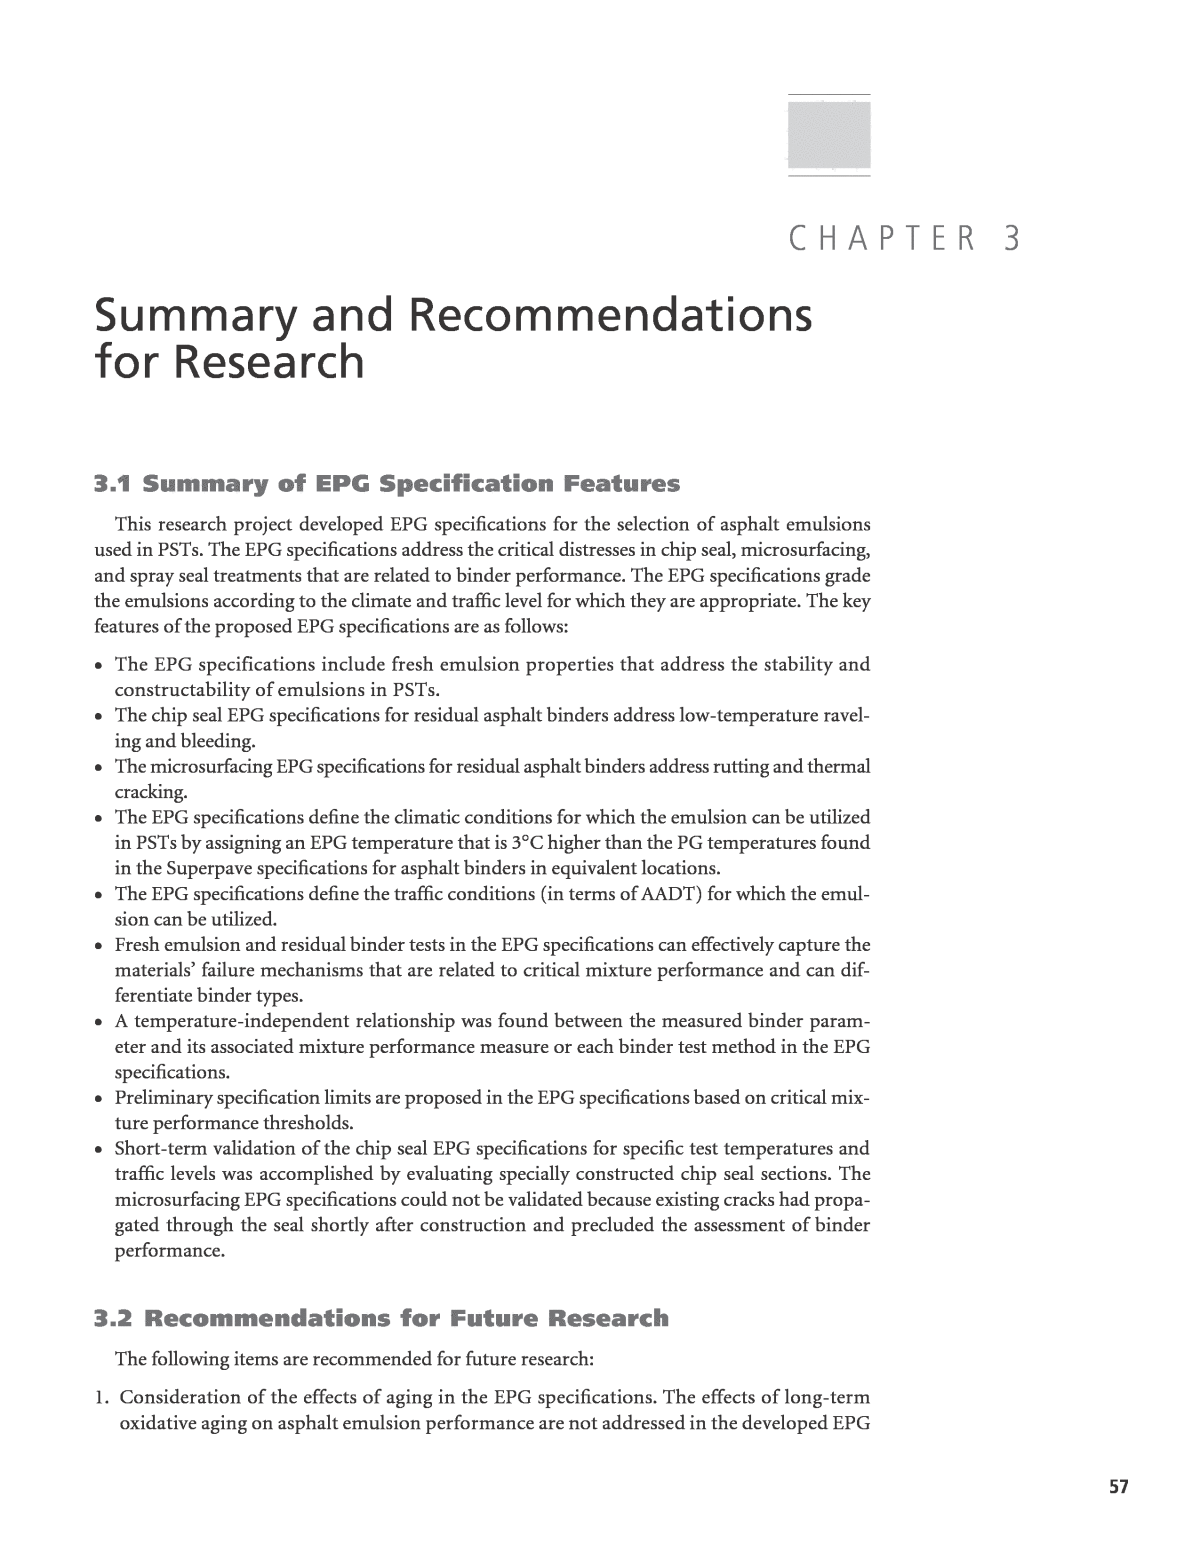 Chapter 3 - Summary and Recommendations for Research | Performance